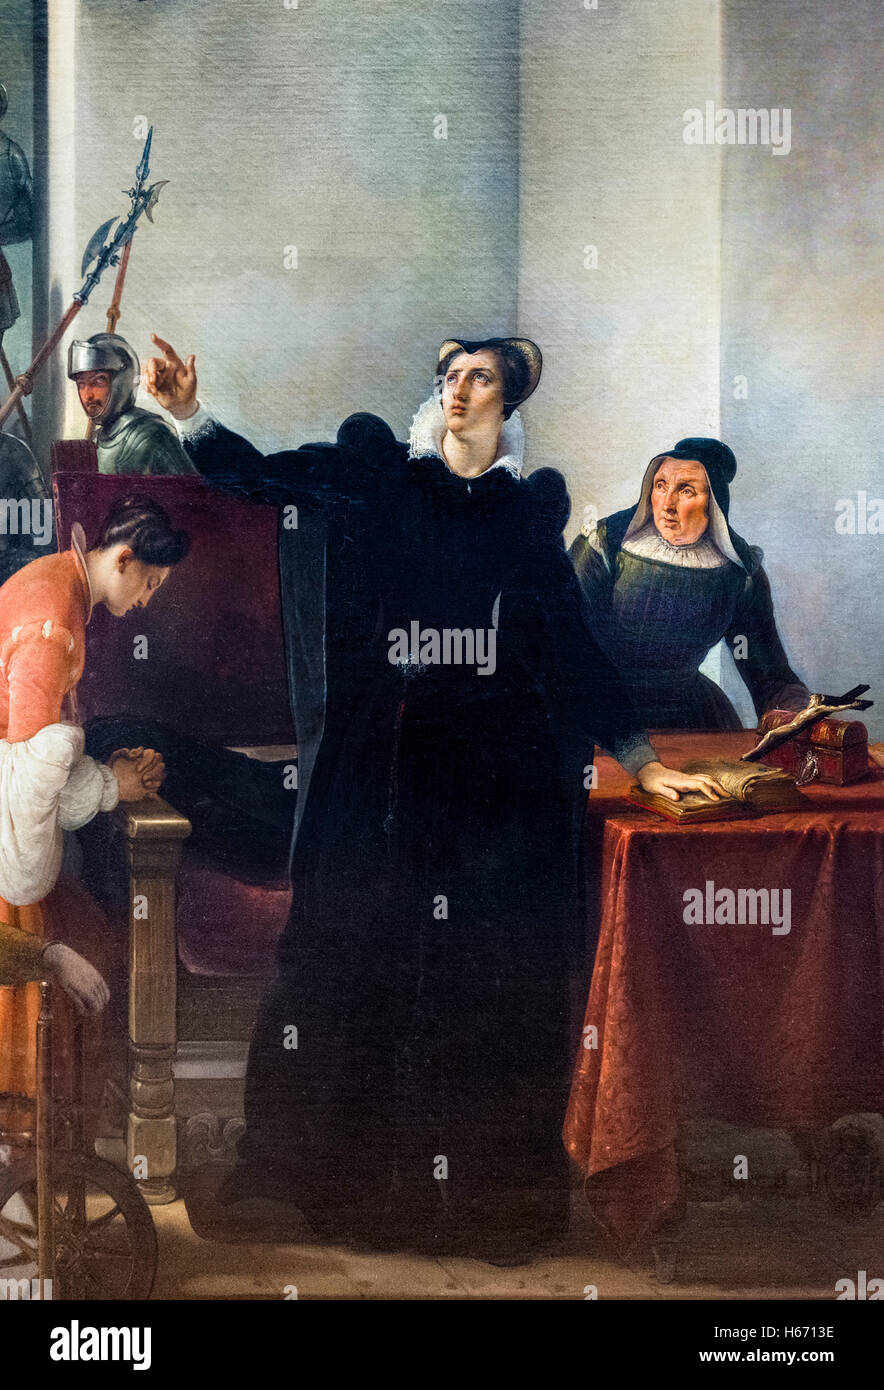 'Mary Stuart (Mary Queen of Scots) Proclaiming her Innocence at her Death Sentencing' by Francesco Hayez, oil on canvas, 1832. This is a detail from a larger painting, H6713F. Stock Photo